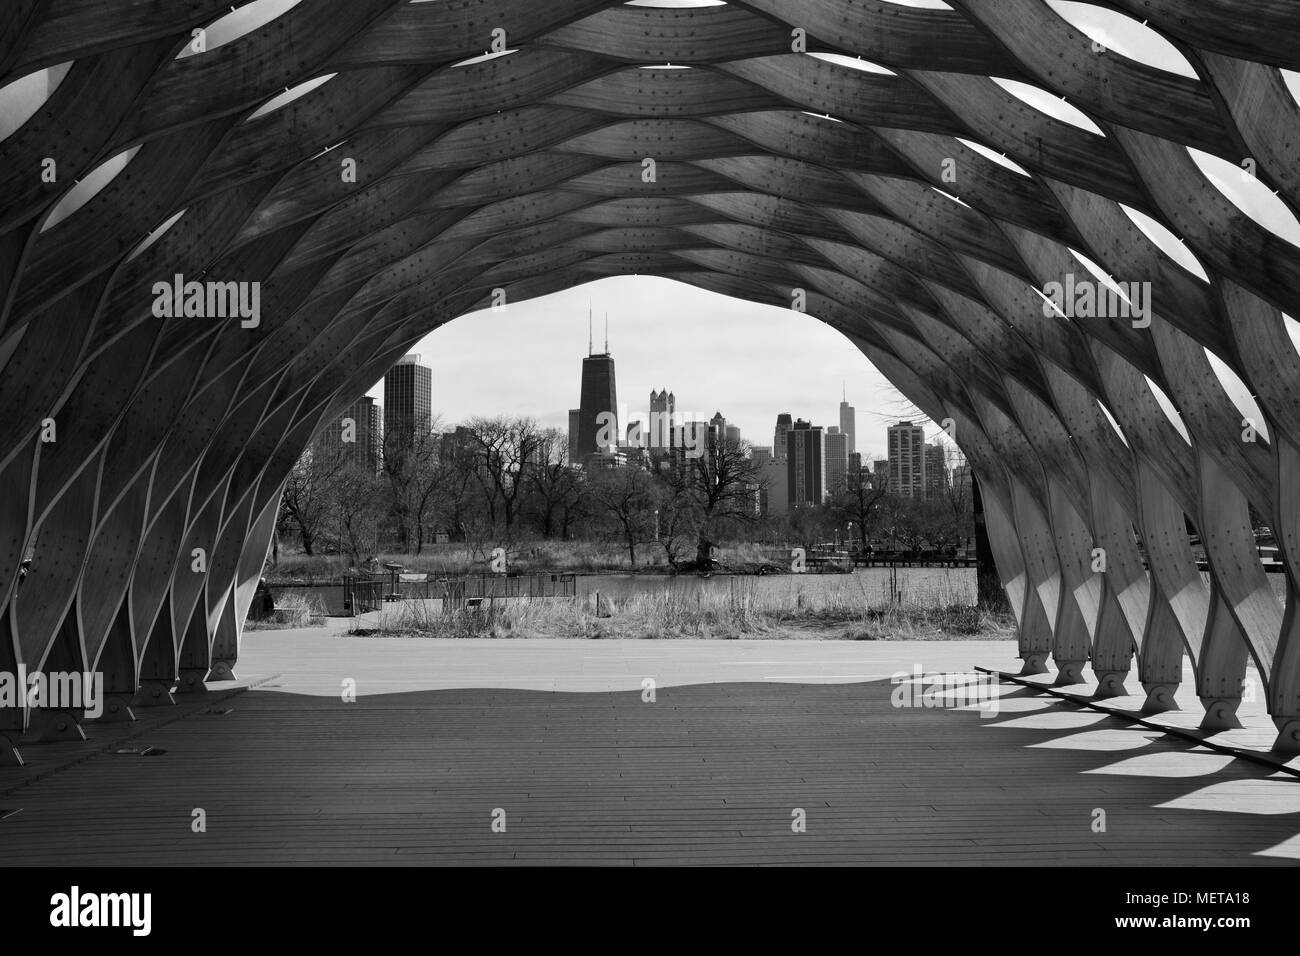 The Chicago skyline as seen through the outdoor education pavilion at the Lincoln Park Zoo South Pond Nature Boardwalk. Stock Photo